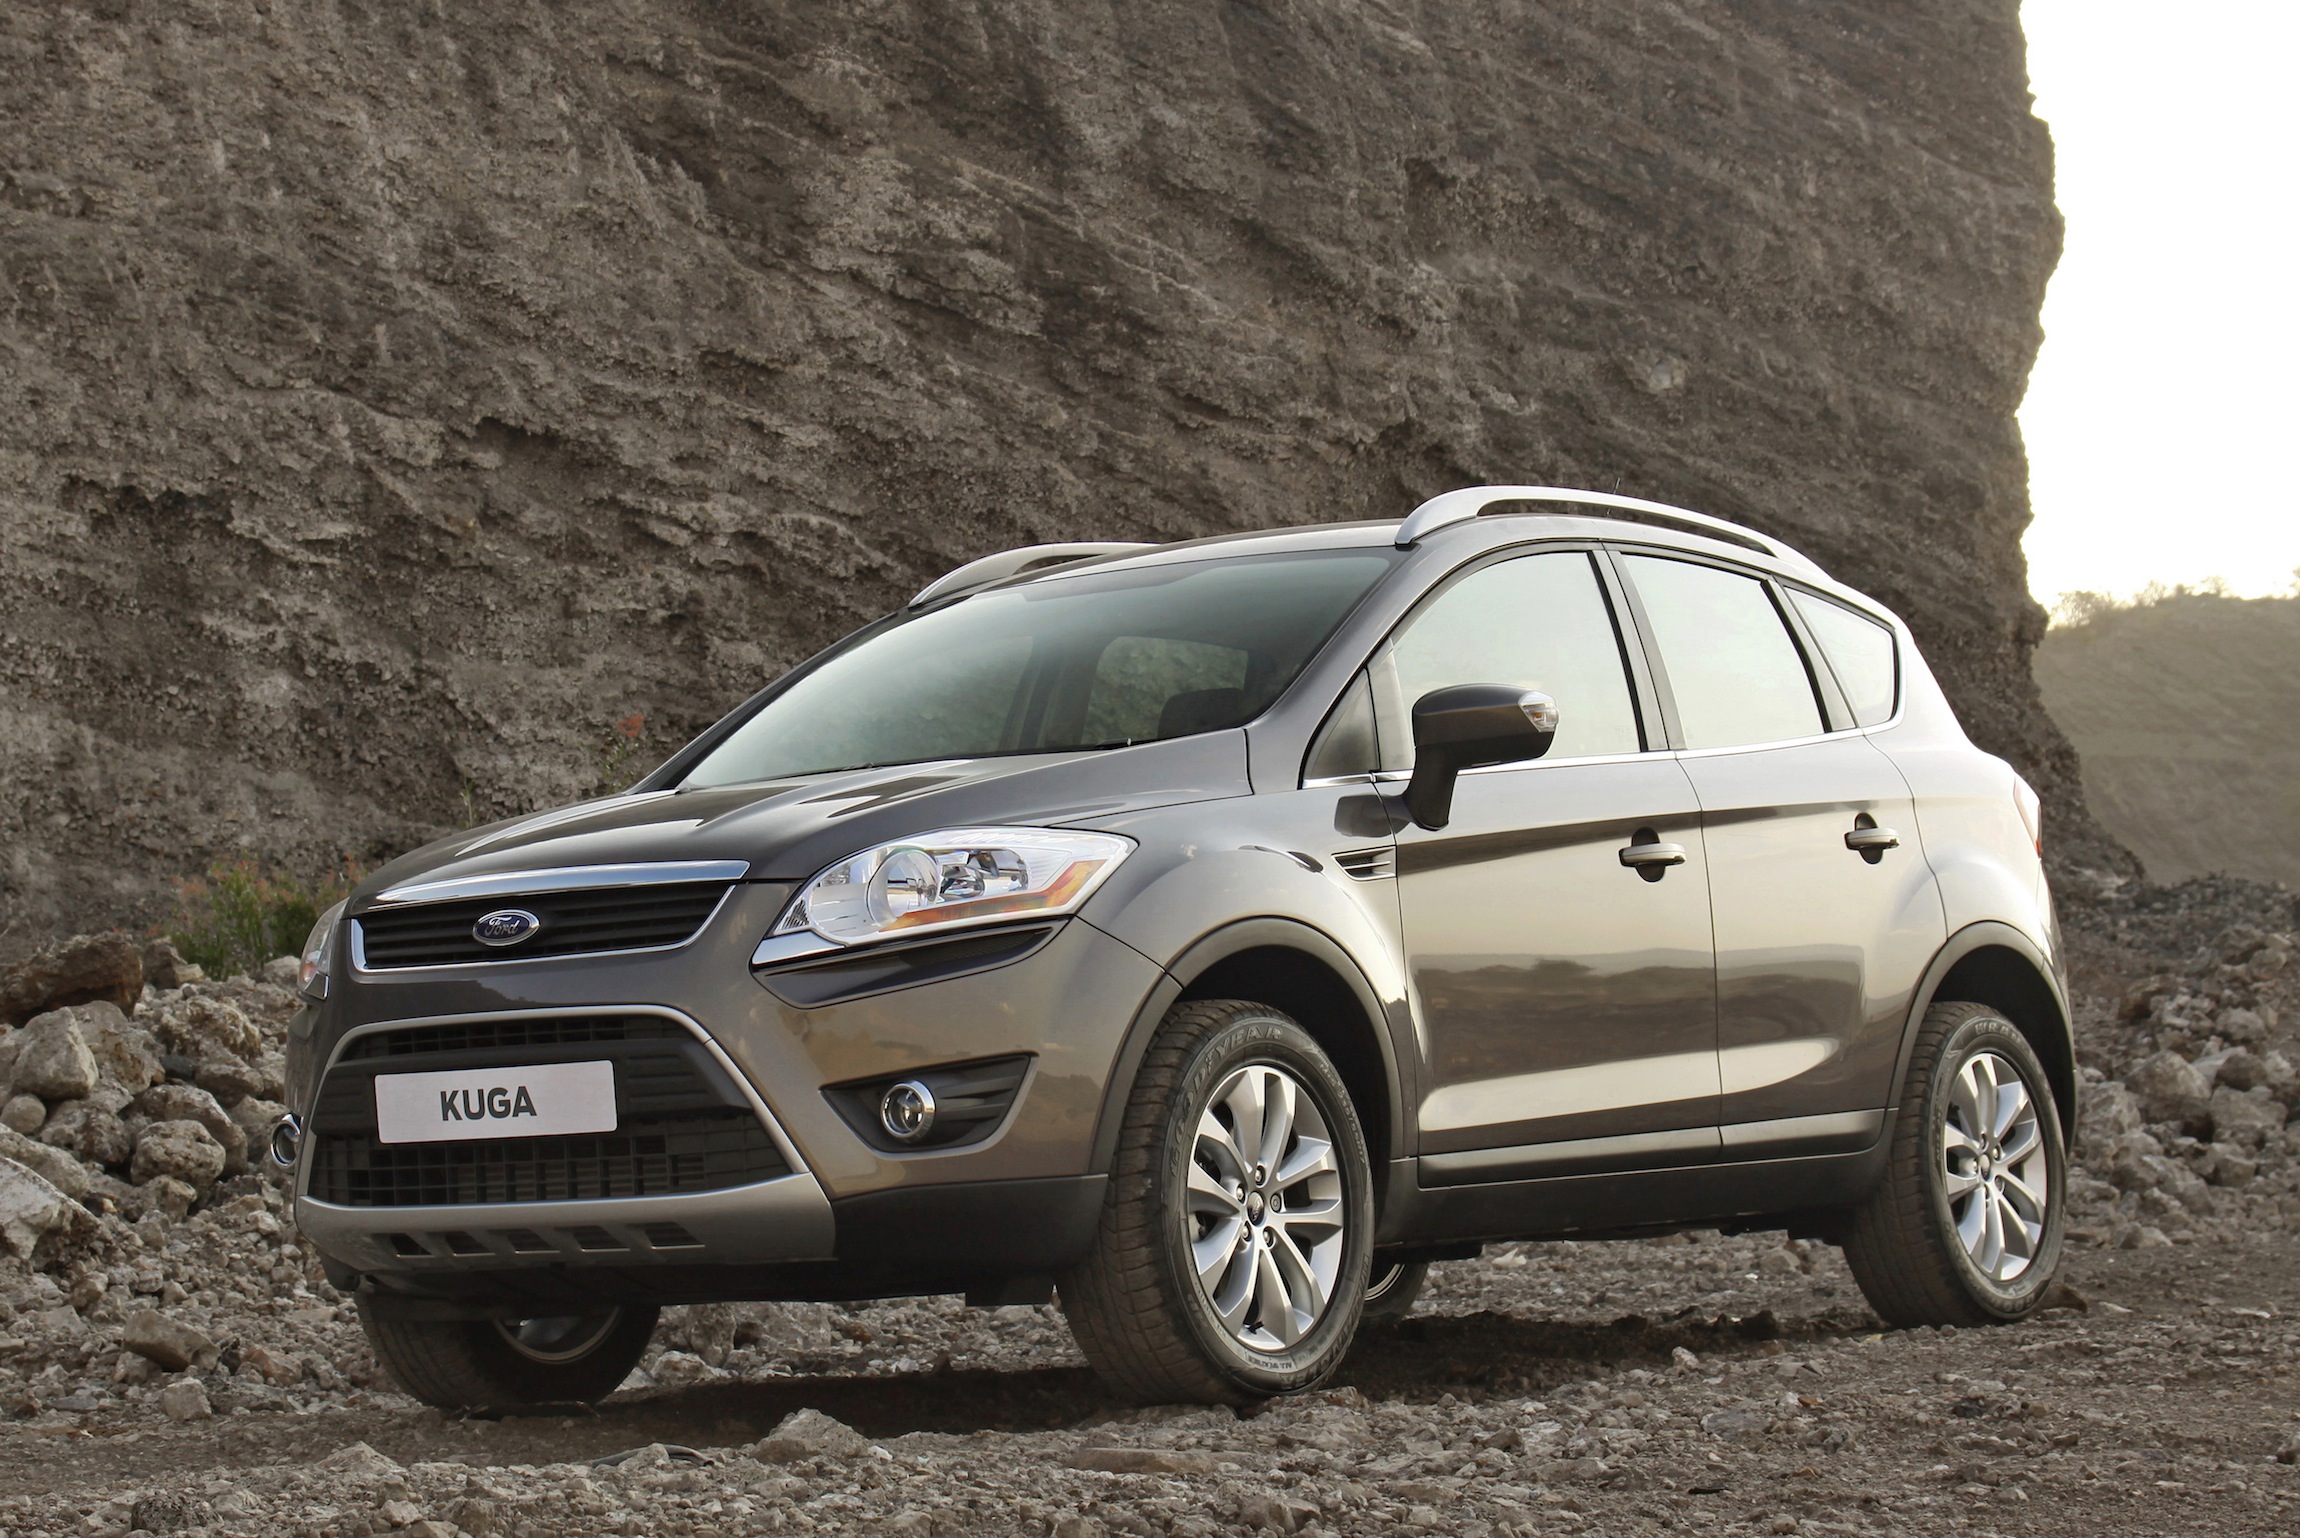 Apr financing available, subject to credit approval by . Ford Kuga Review - photos | CarAdvice